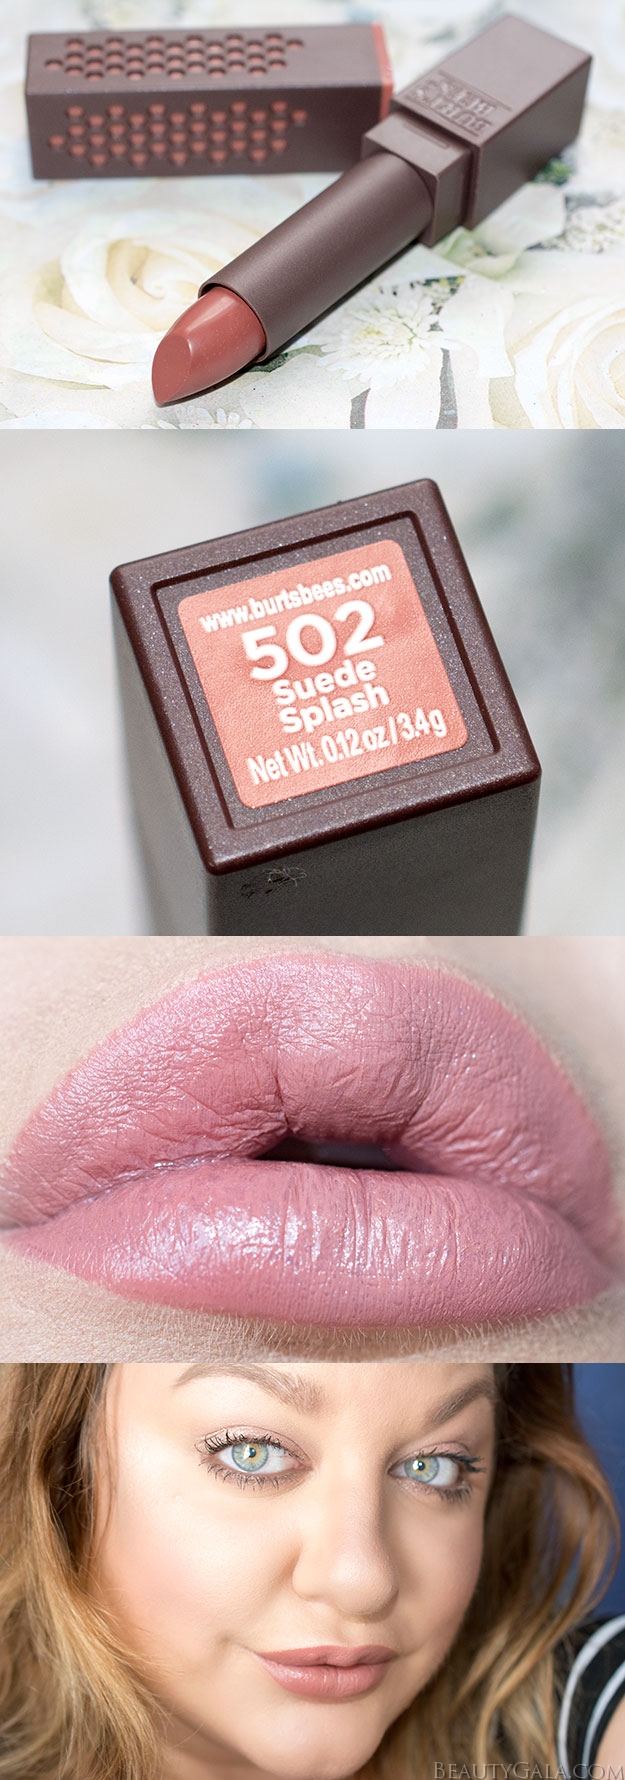 Drugstore Beauty: Burt’s Bees Lipstick Swatches & Review.